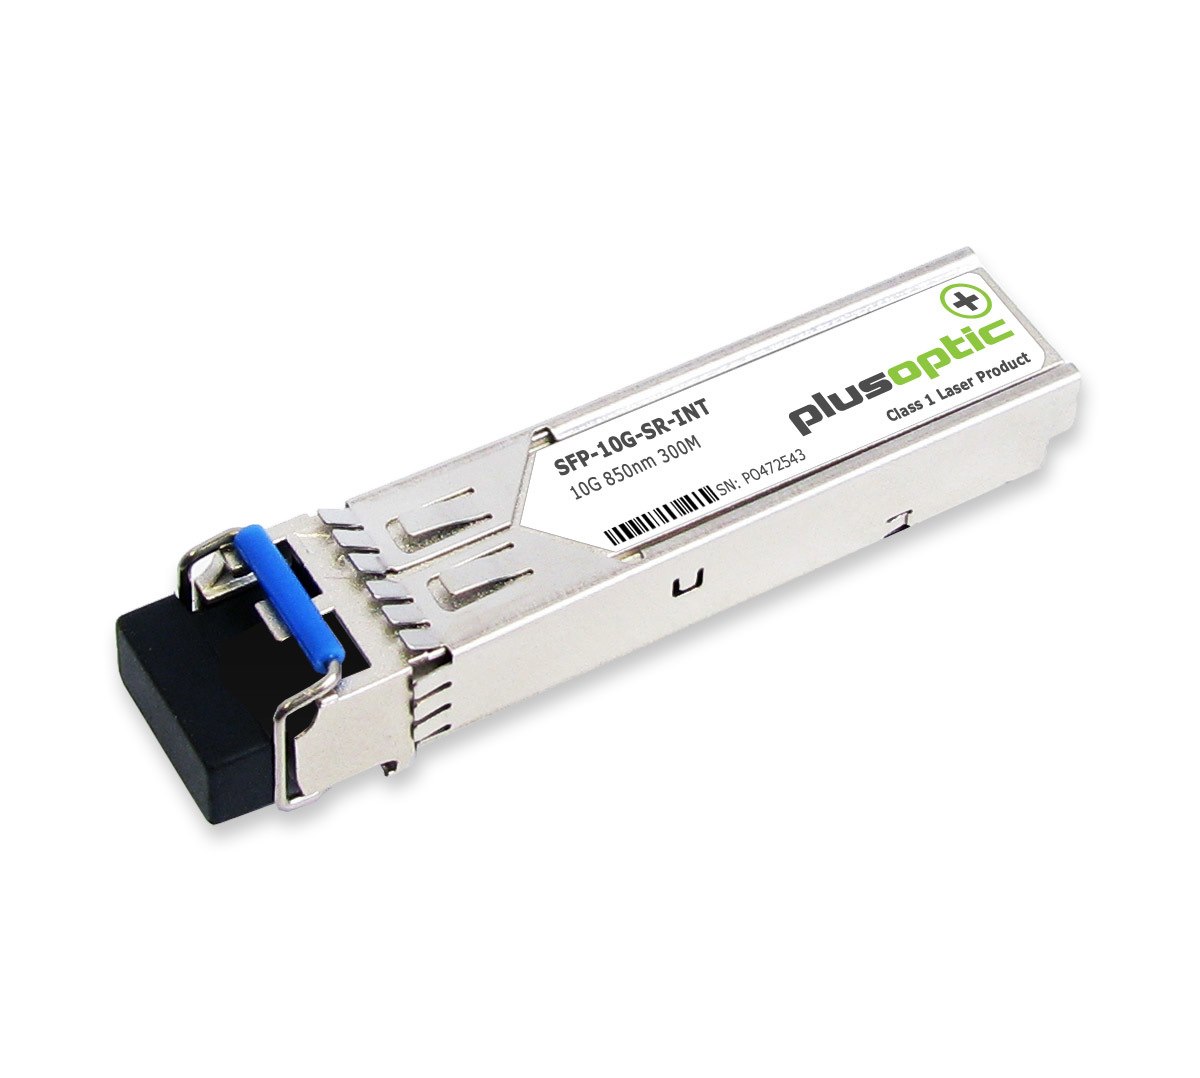 PlusOptic Intel Compatible (E10gsfpsr) 10G, SFP+, 850NM, 300M Transceiver, LC Connector For MMF With Dom | PlusOptic Sfp-10G-Sr-Int